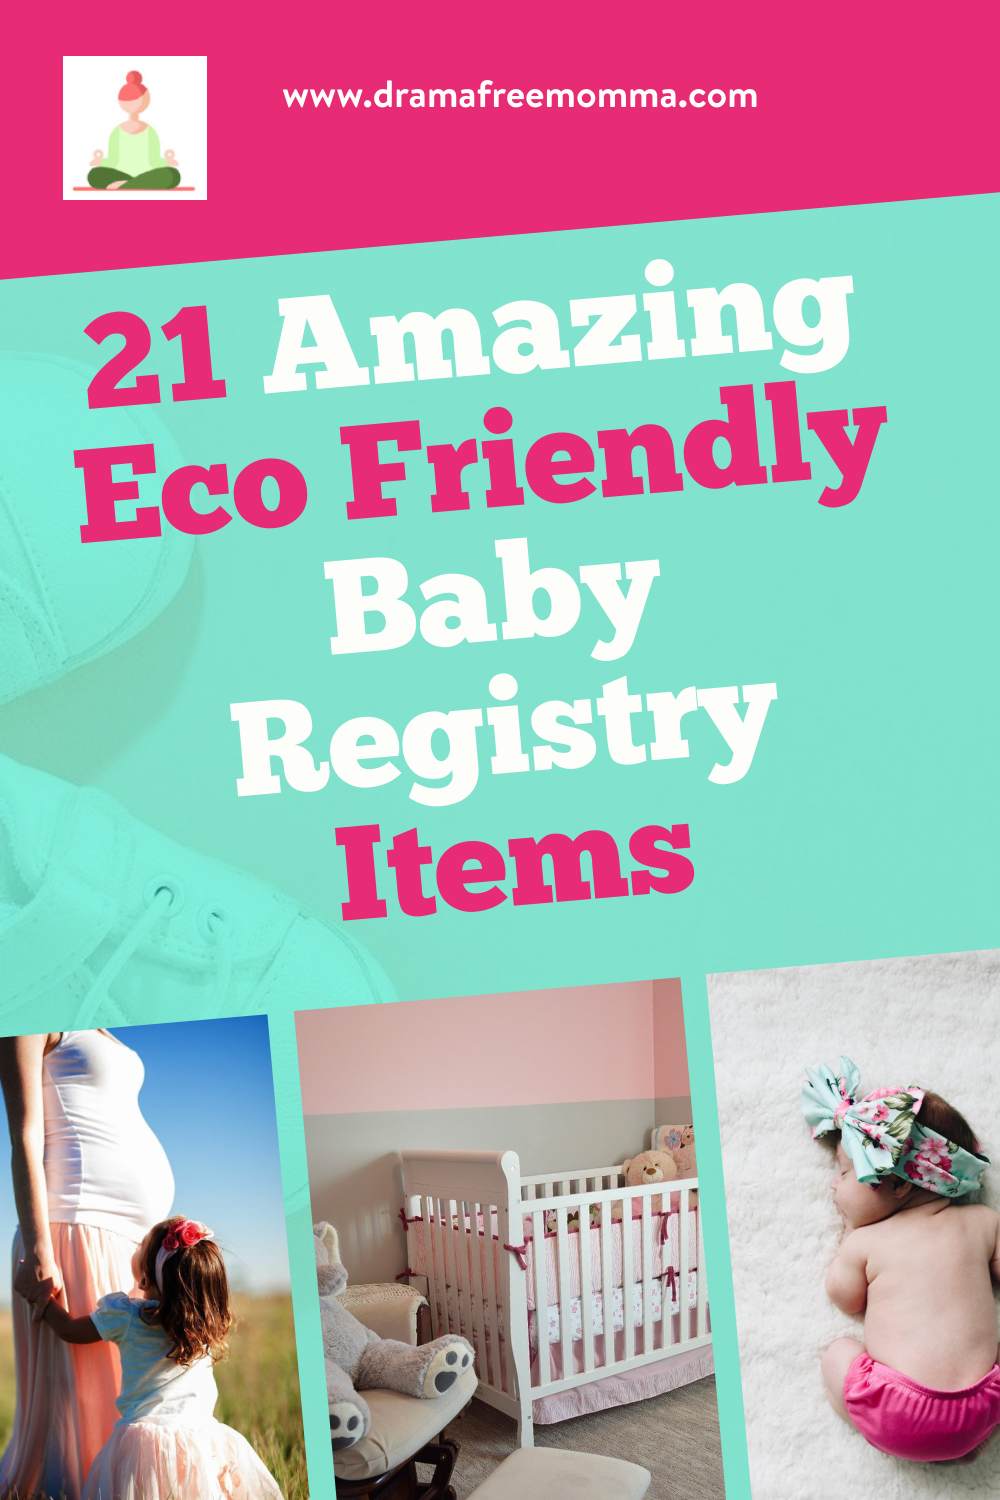 baby registry, eco-friendly baby registry, eco-friendly baby products, eco-friendly baby items, eco-friendly baby stuff, eco-friendly nursery, eco-friendly diapering, reusable diapers, reusable baby products, eco-mom, eco-friendly parenting, new mom, pregnancy, baby registry, how to create an eco-friendly baby registry, eco-friendly baby shower gifts, eco-friendly baby care, green baby products, earth-friendly baby, eco-conscious mom, baby registry must haves